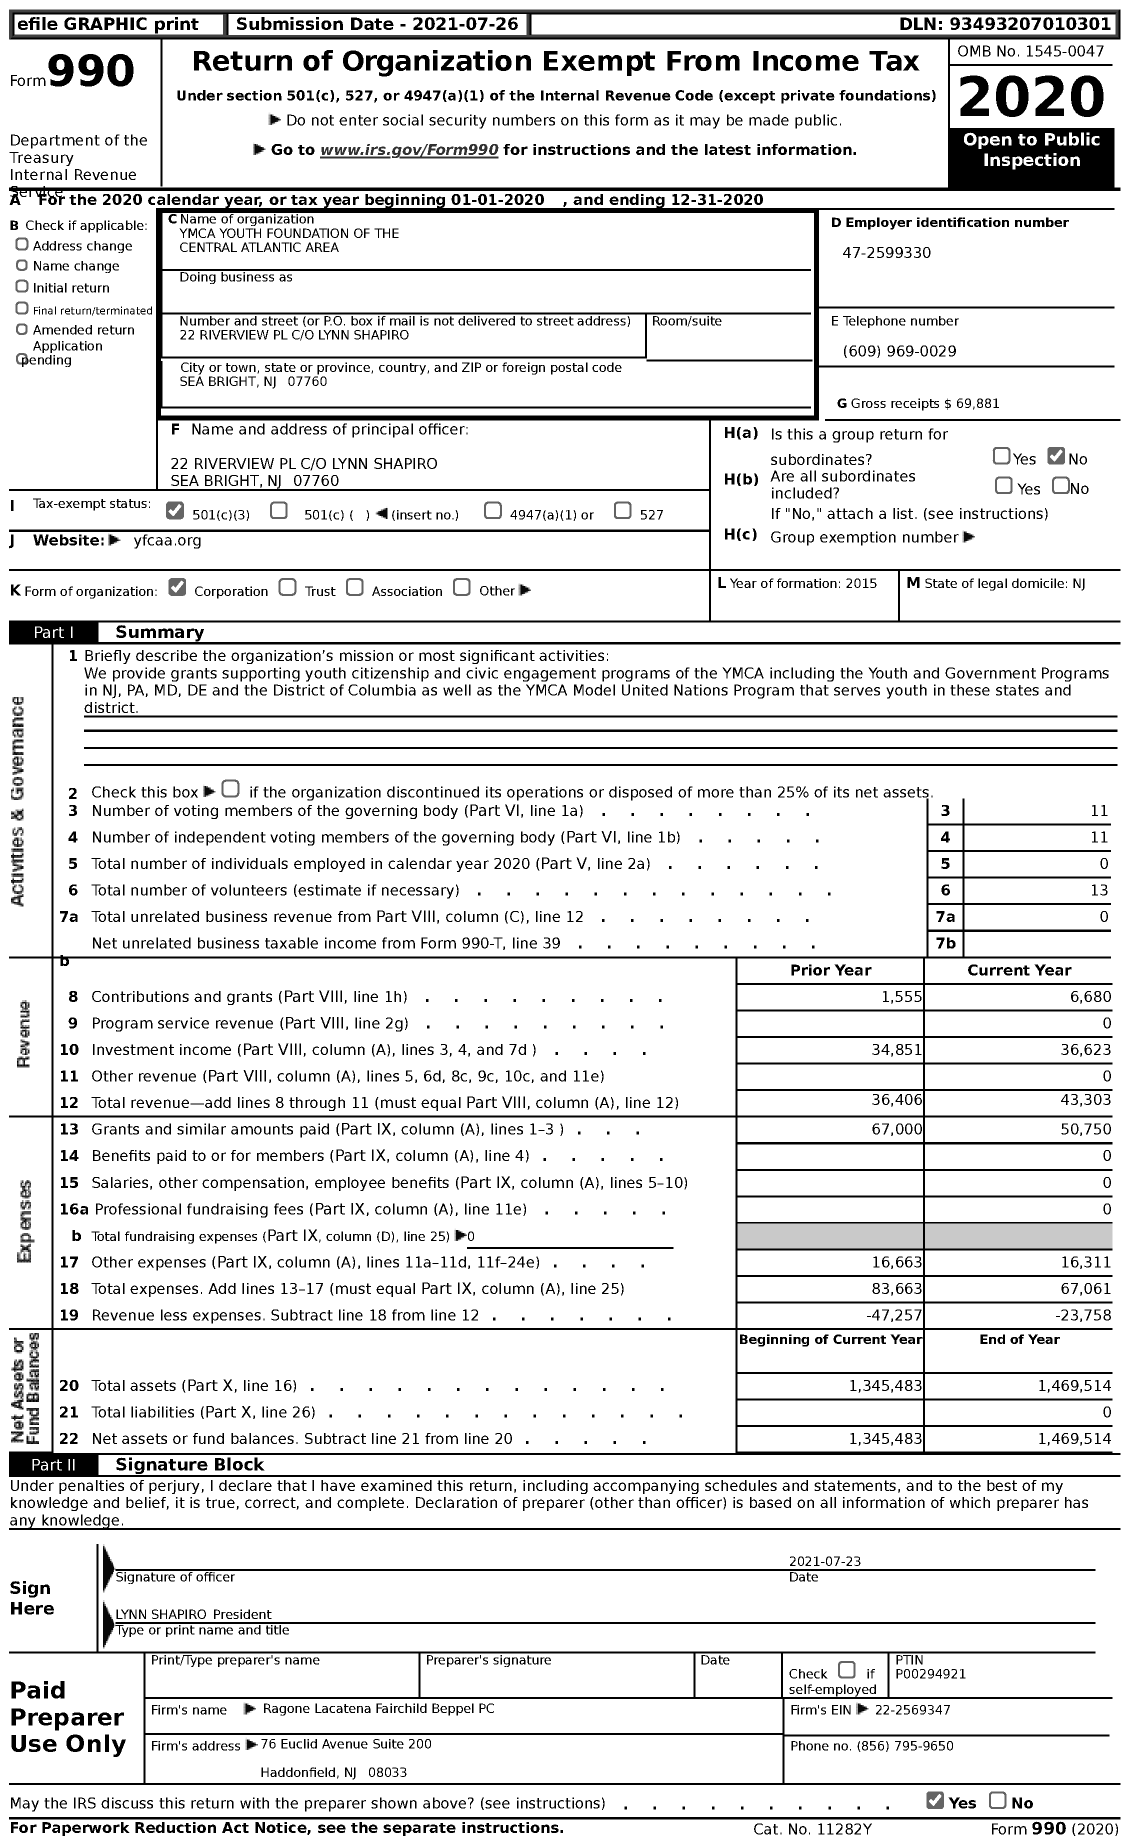 Image of first page of 2020 Form 990 for Ymca Youth Foundation of the Central Atlantic Area